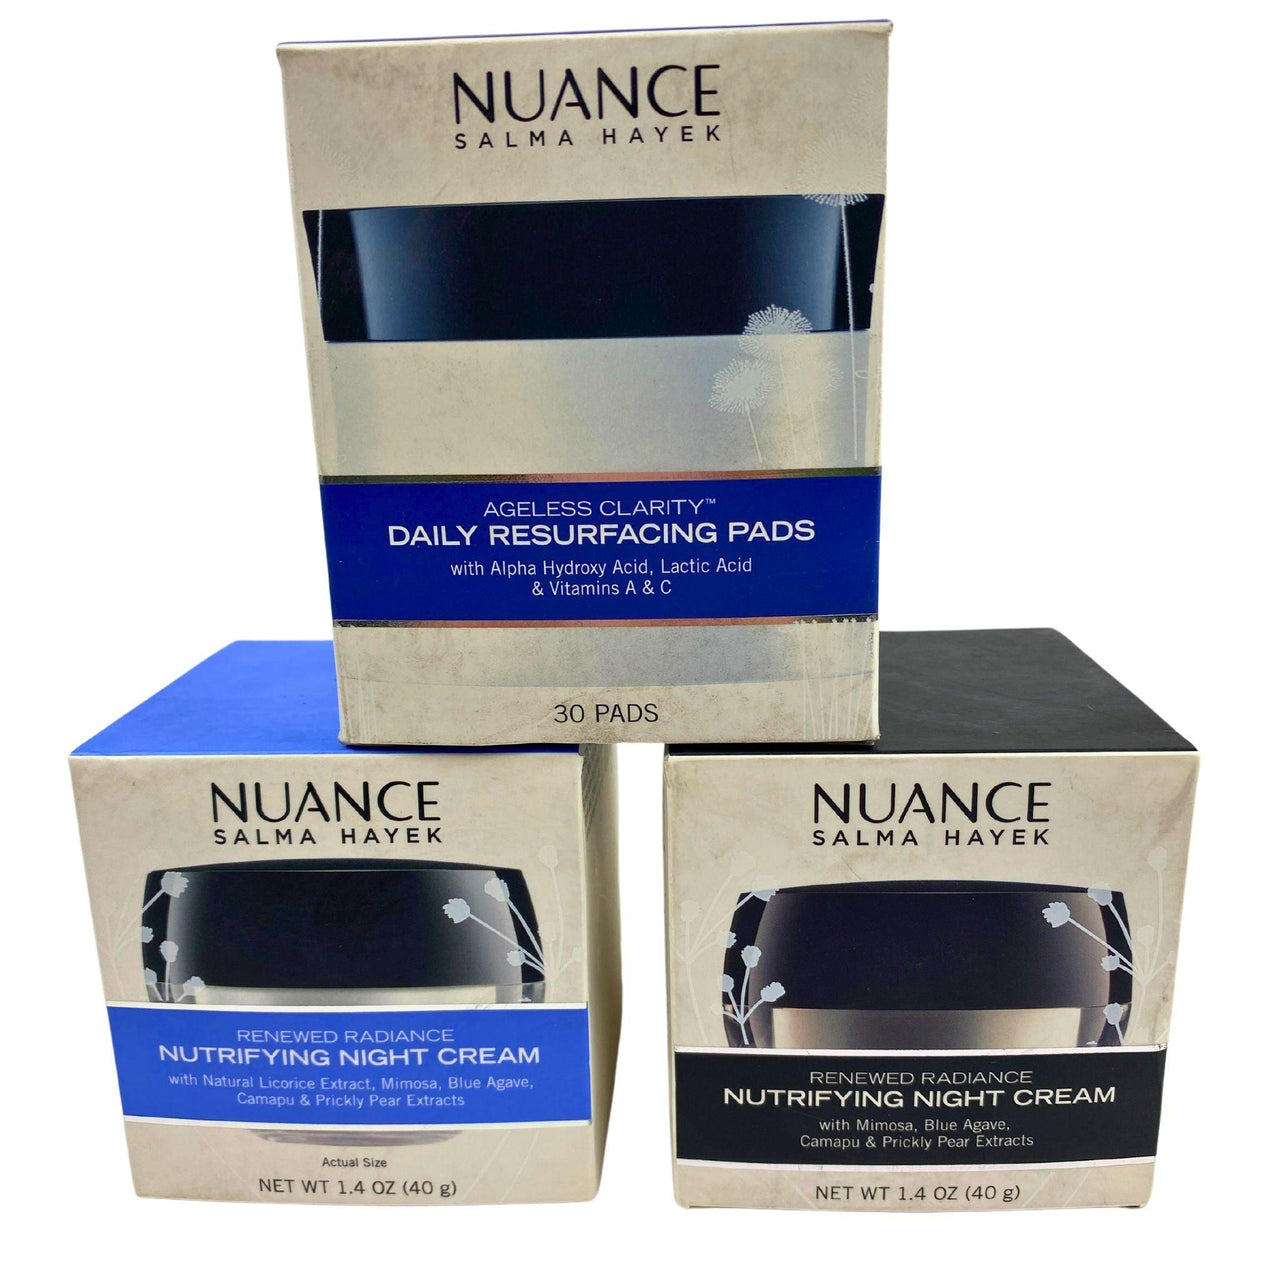 Nuance Salma Hayek Assorted Mix - includes Renewed Radiance Nutrifying Night Cream and Ageless Clarity Daily Resurfacing Pads (20 Pcs Lot) - Discount Wholesalers Inc